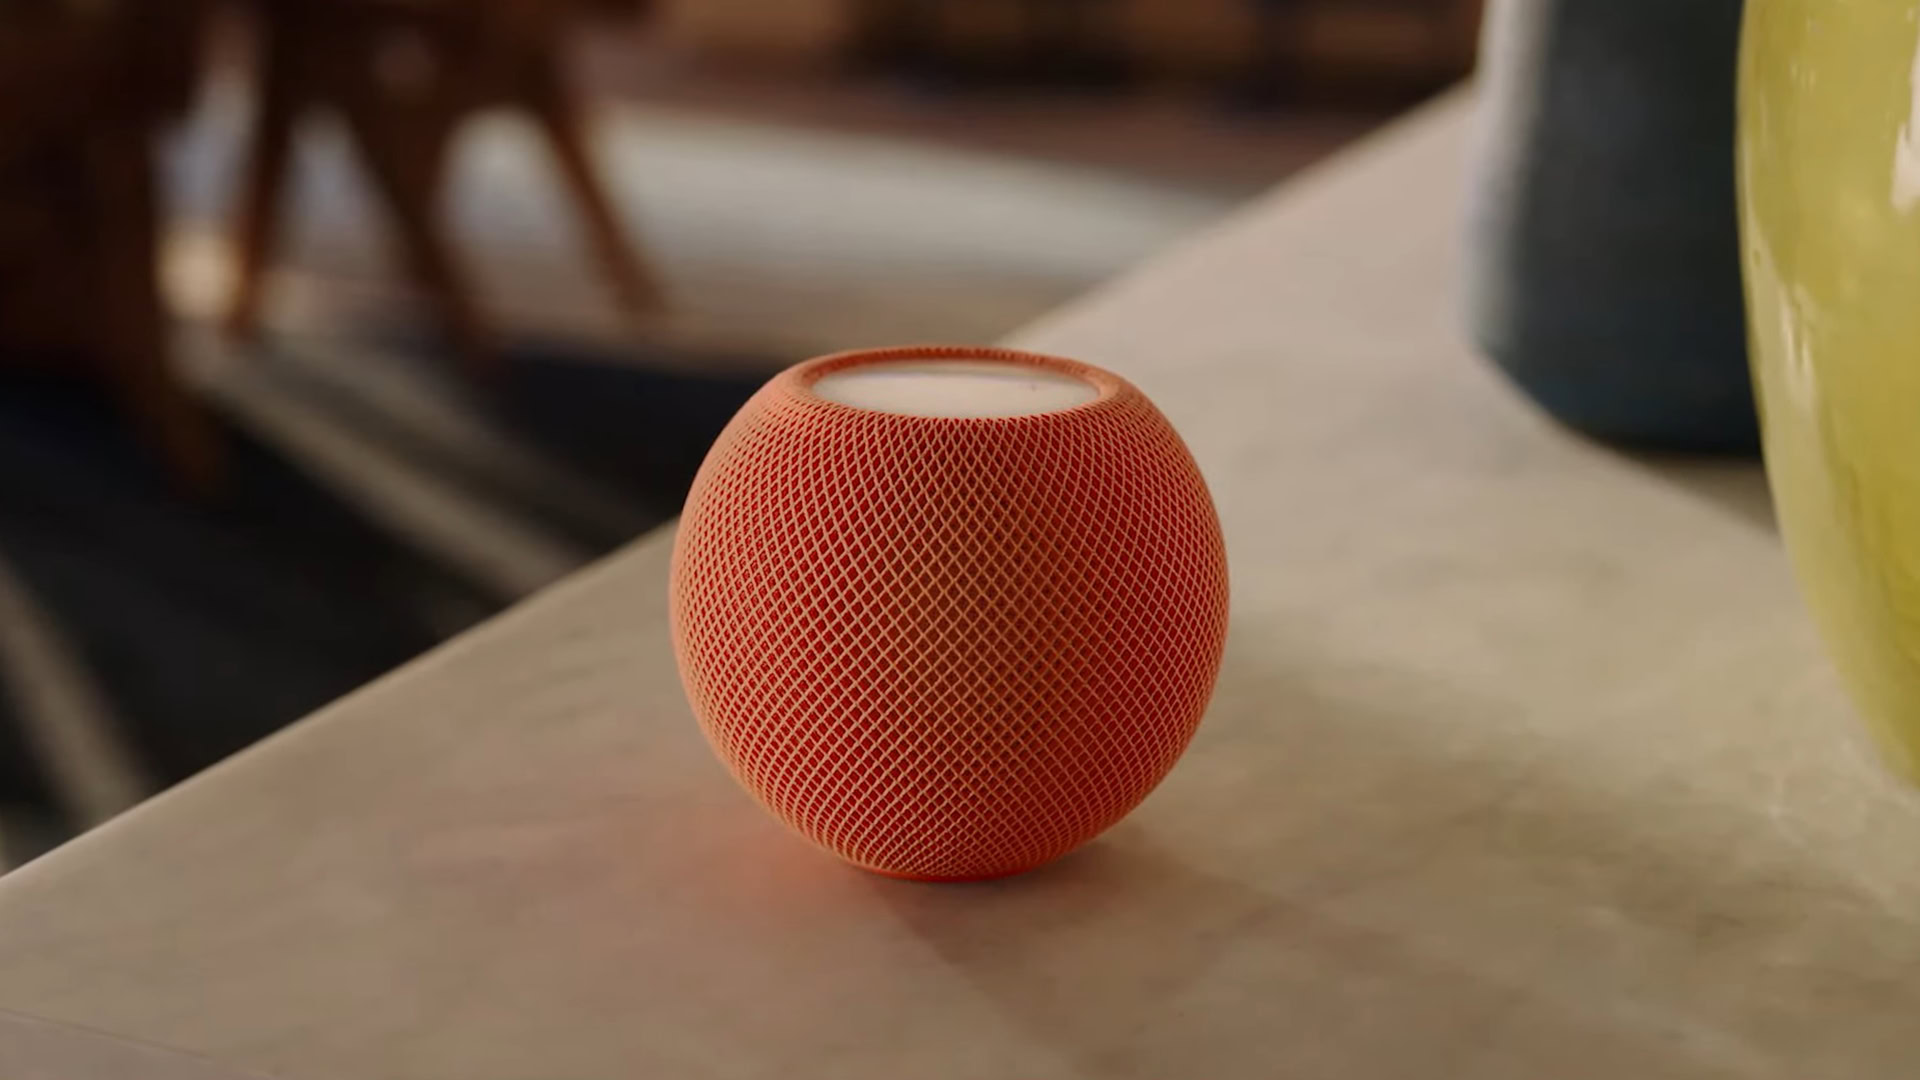 mini - How Android up Apple HomePod an set or Authority to HomePod